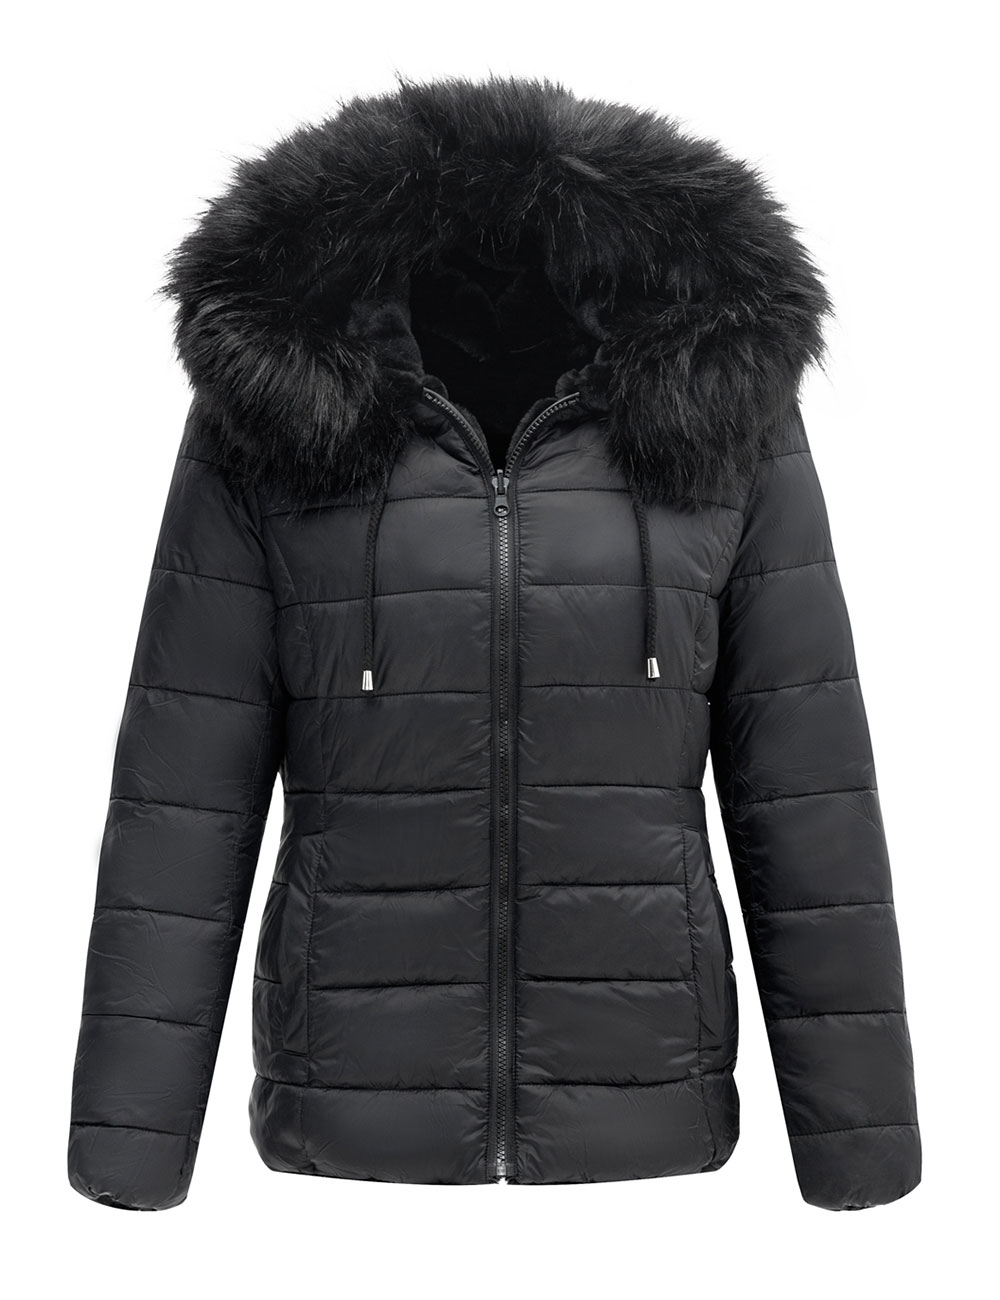 Giolshon Women's Double Sided Puffer Coats Faux Fur Jacket with Fur Collar Fall and Winter - image 2 of 6